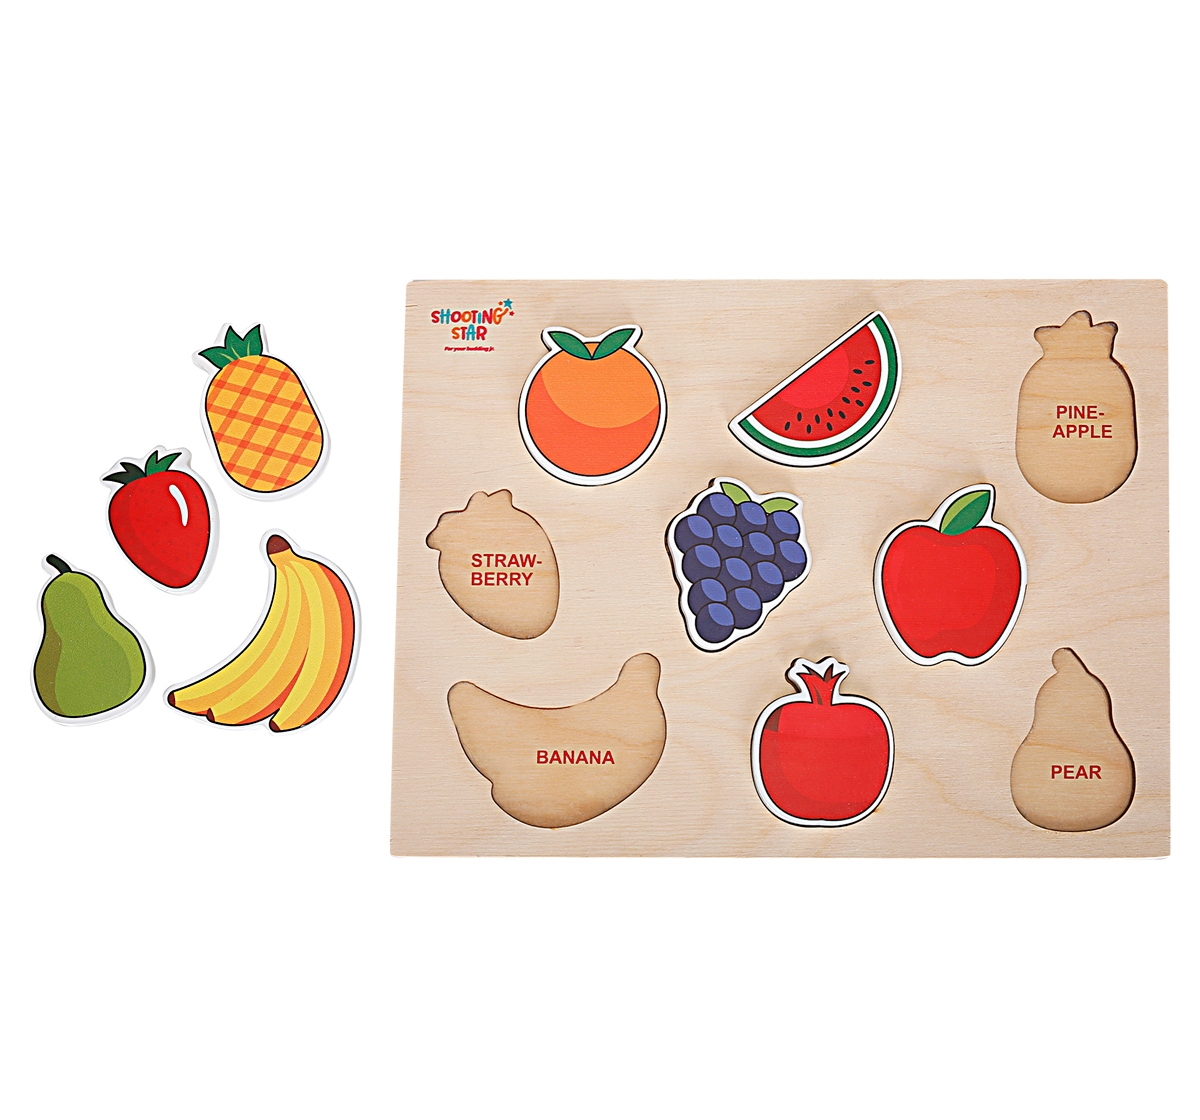 Shooting Star | Shooting Star Fruits Puzzle Chunky 9Piece Multicolour 3Y+